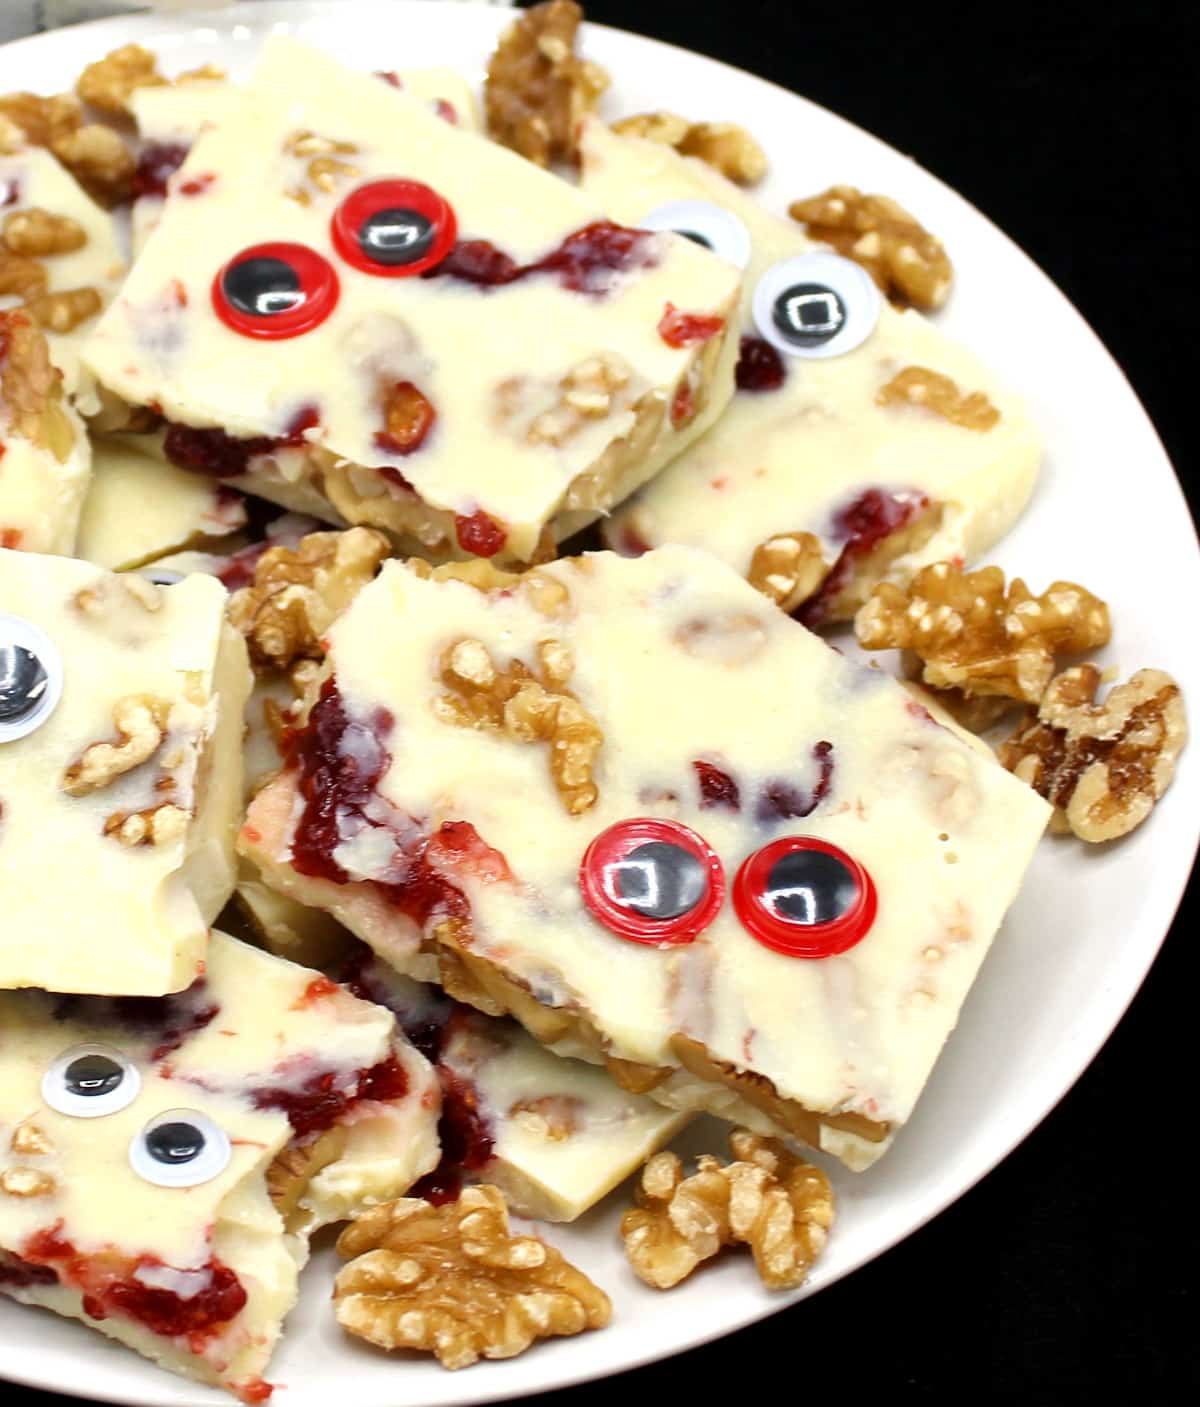 Vegan White Chocolate Bark with raspberry "blood" and smashed walnut "brains" and googly eyes in a white plate, for Halloween.